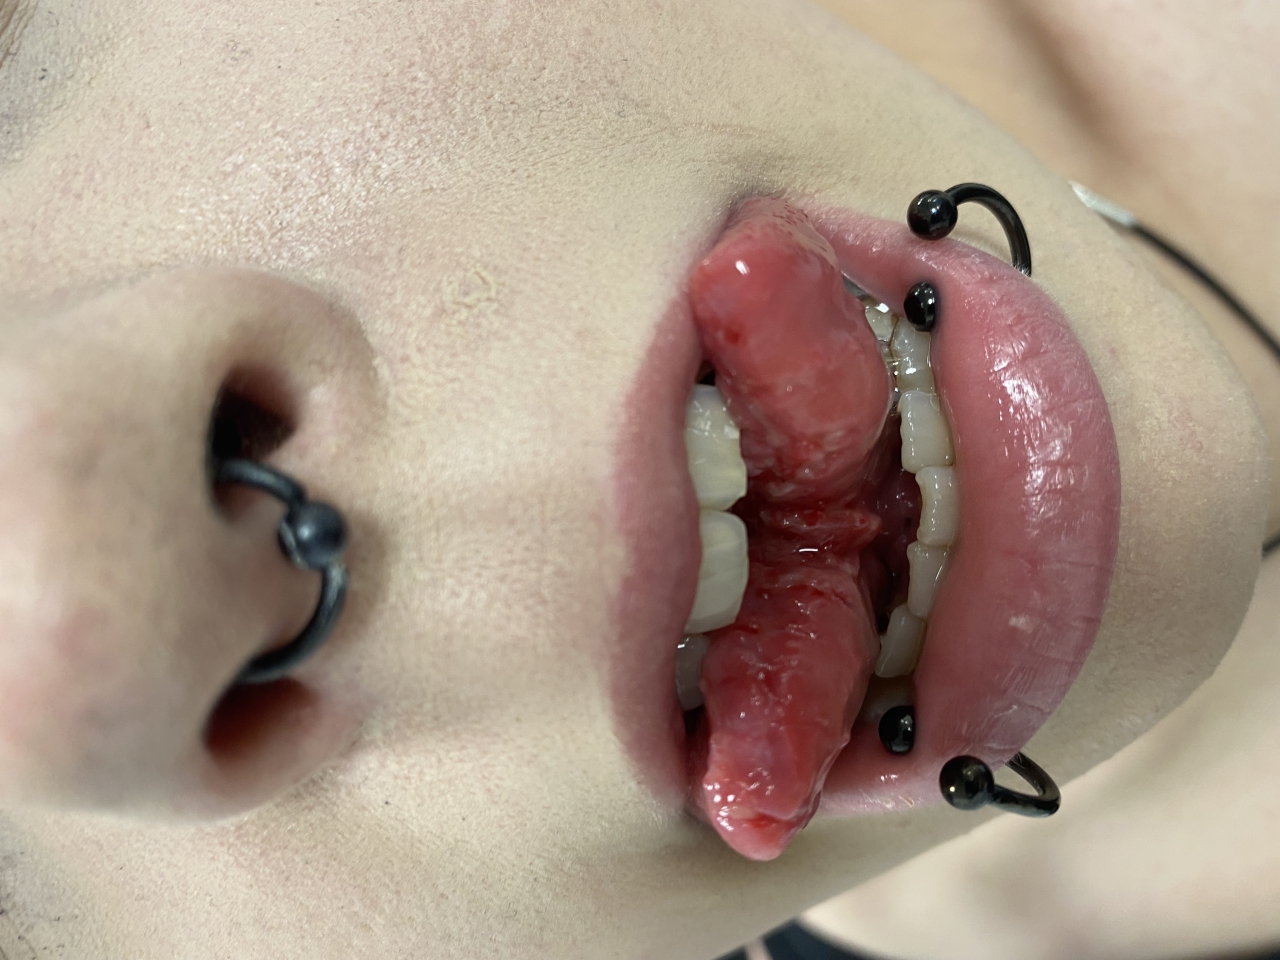 Extreme Art: Meet The Man With 453 Piercings, 278 In His Genital Area  (PHOTOS) - The Trent